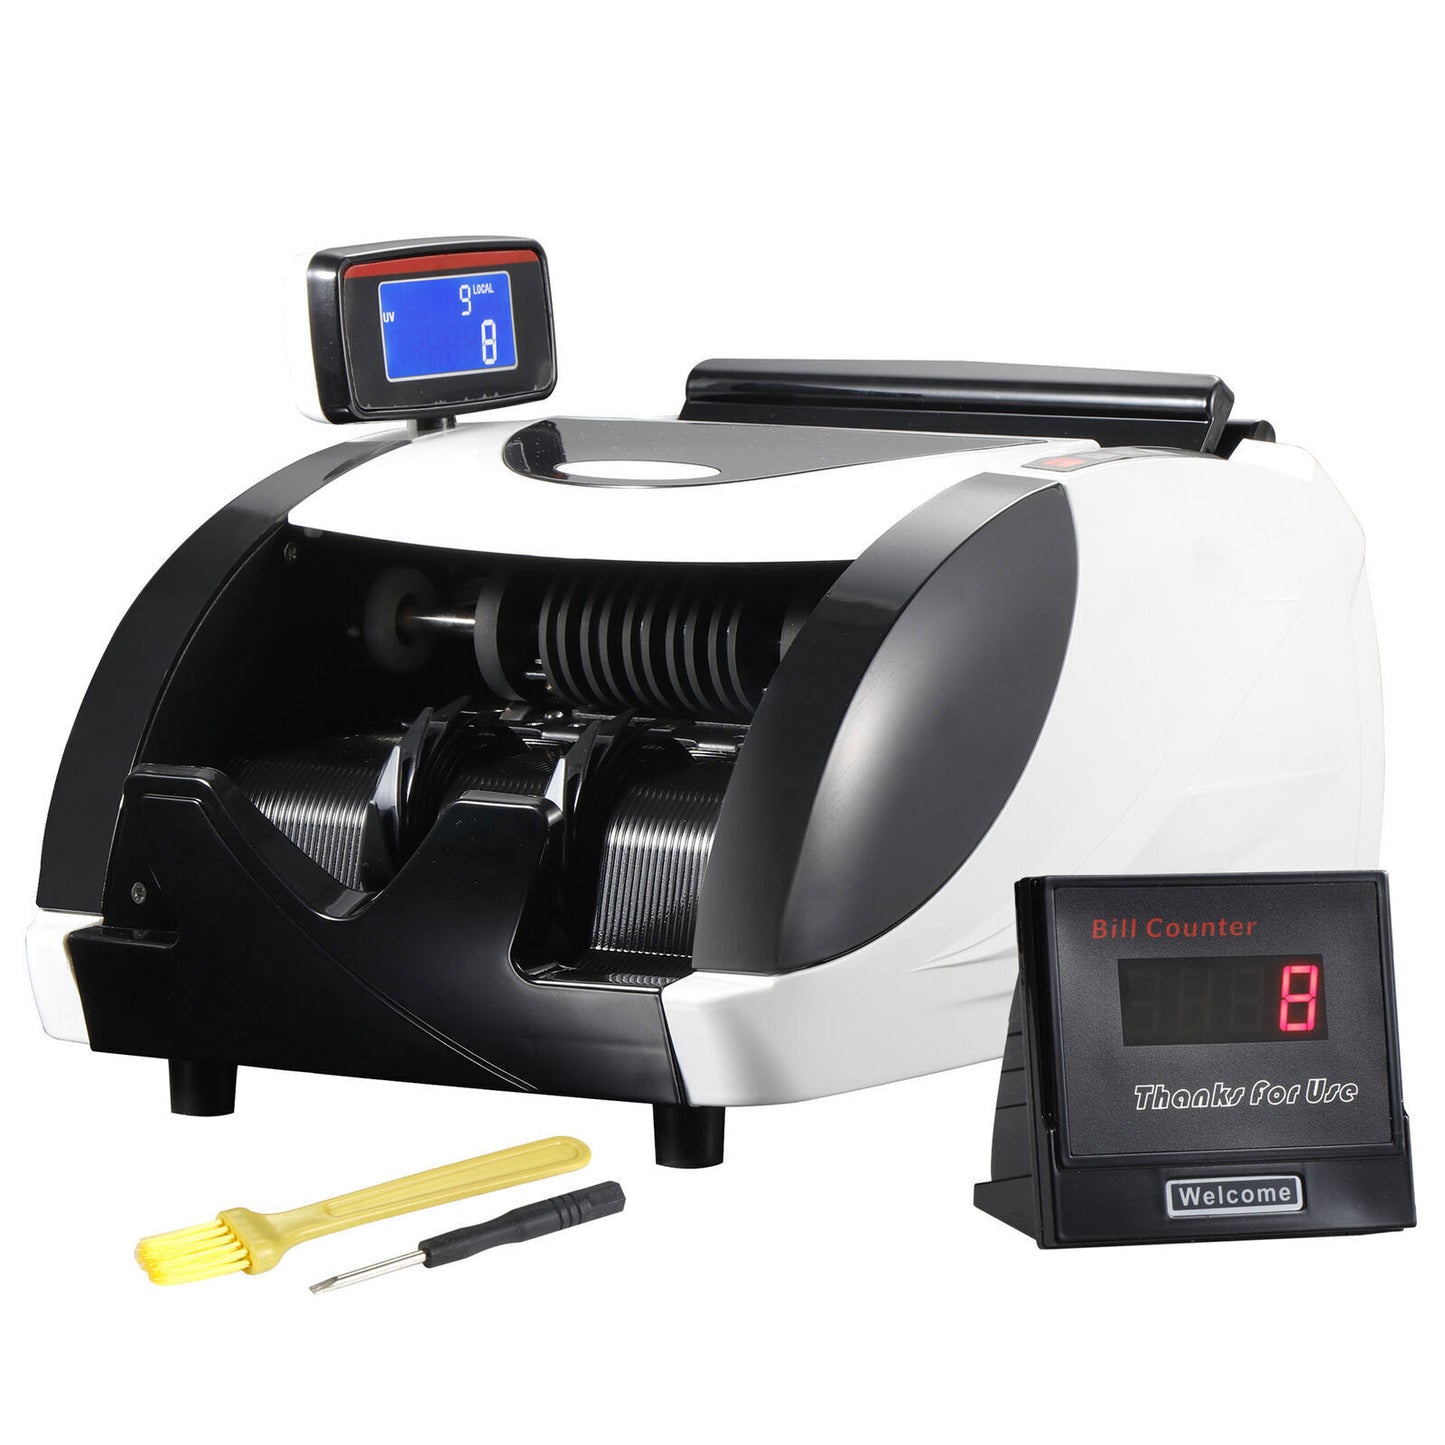 Pro Money Cash Bill Counter Currency Counting Machine Counterfeit Detector UV MG